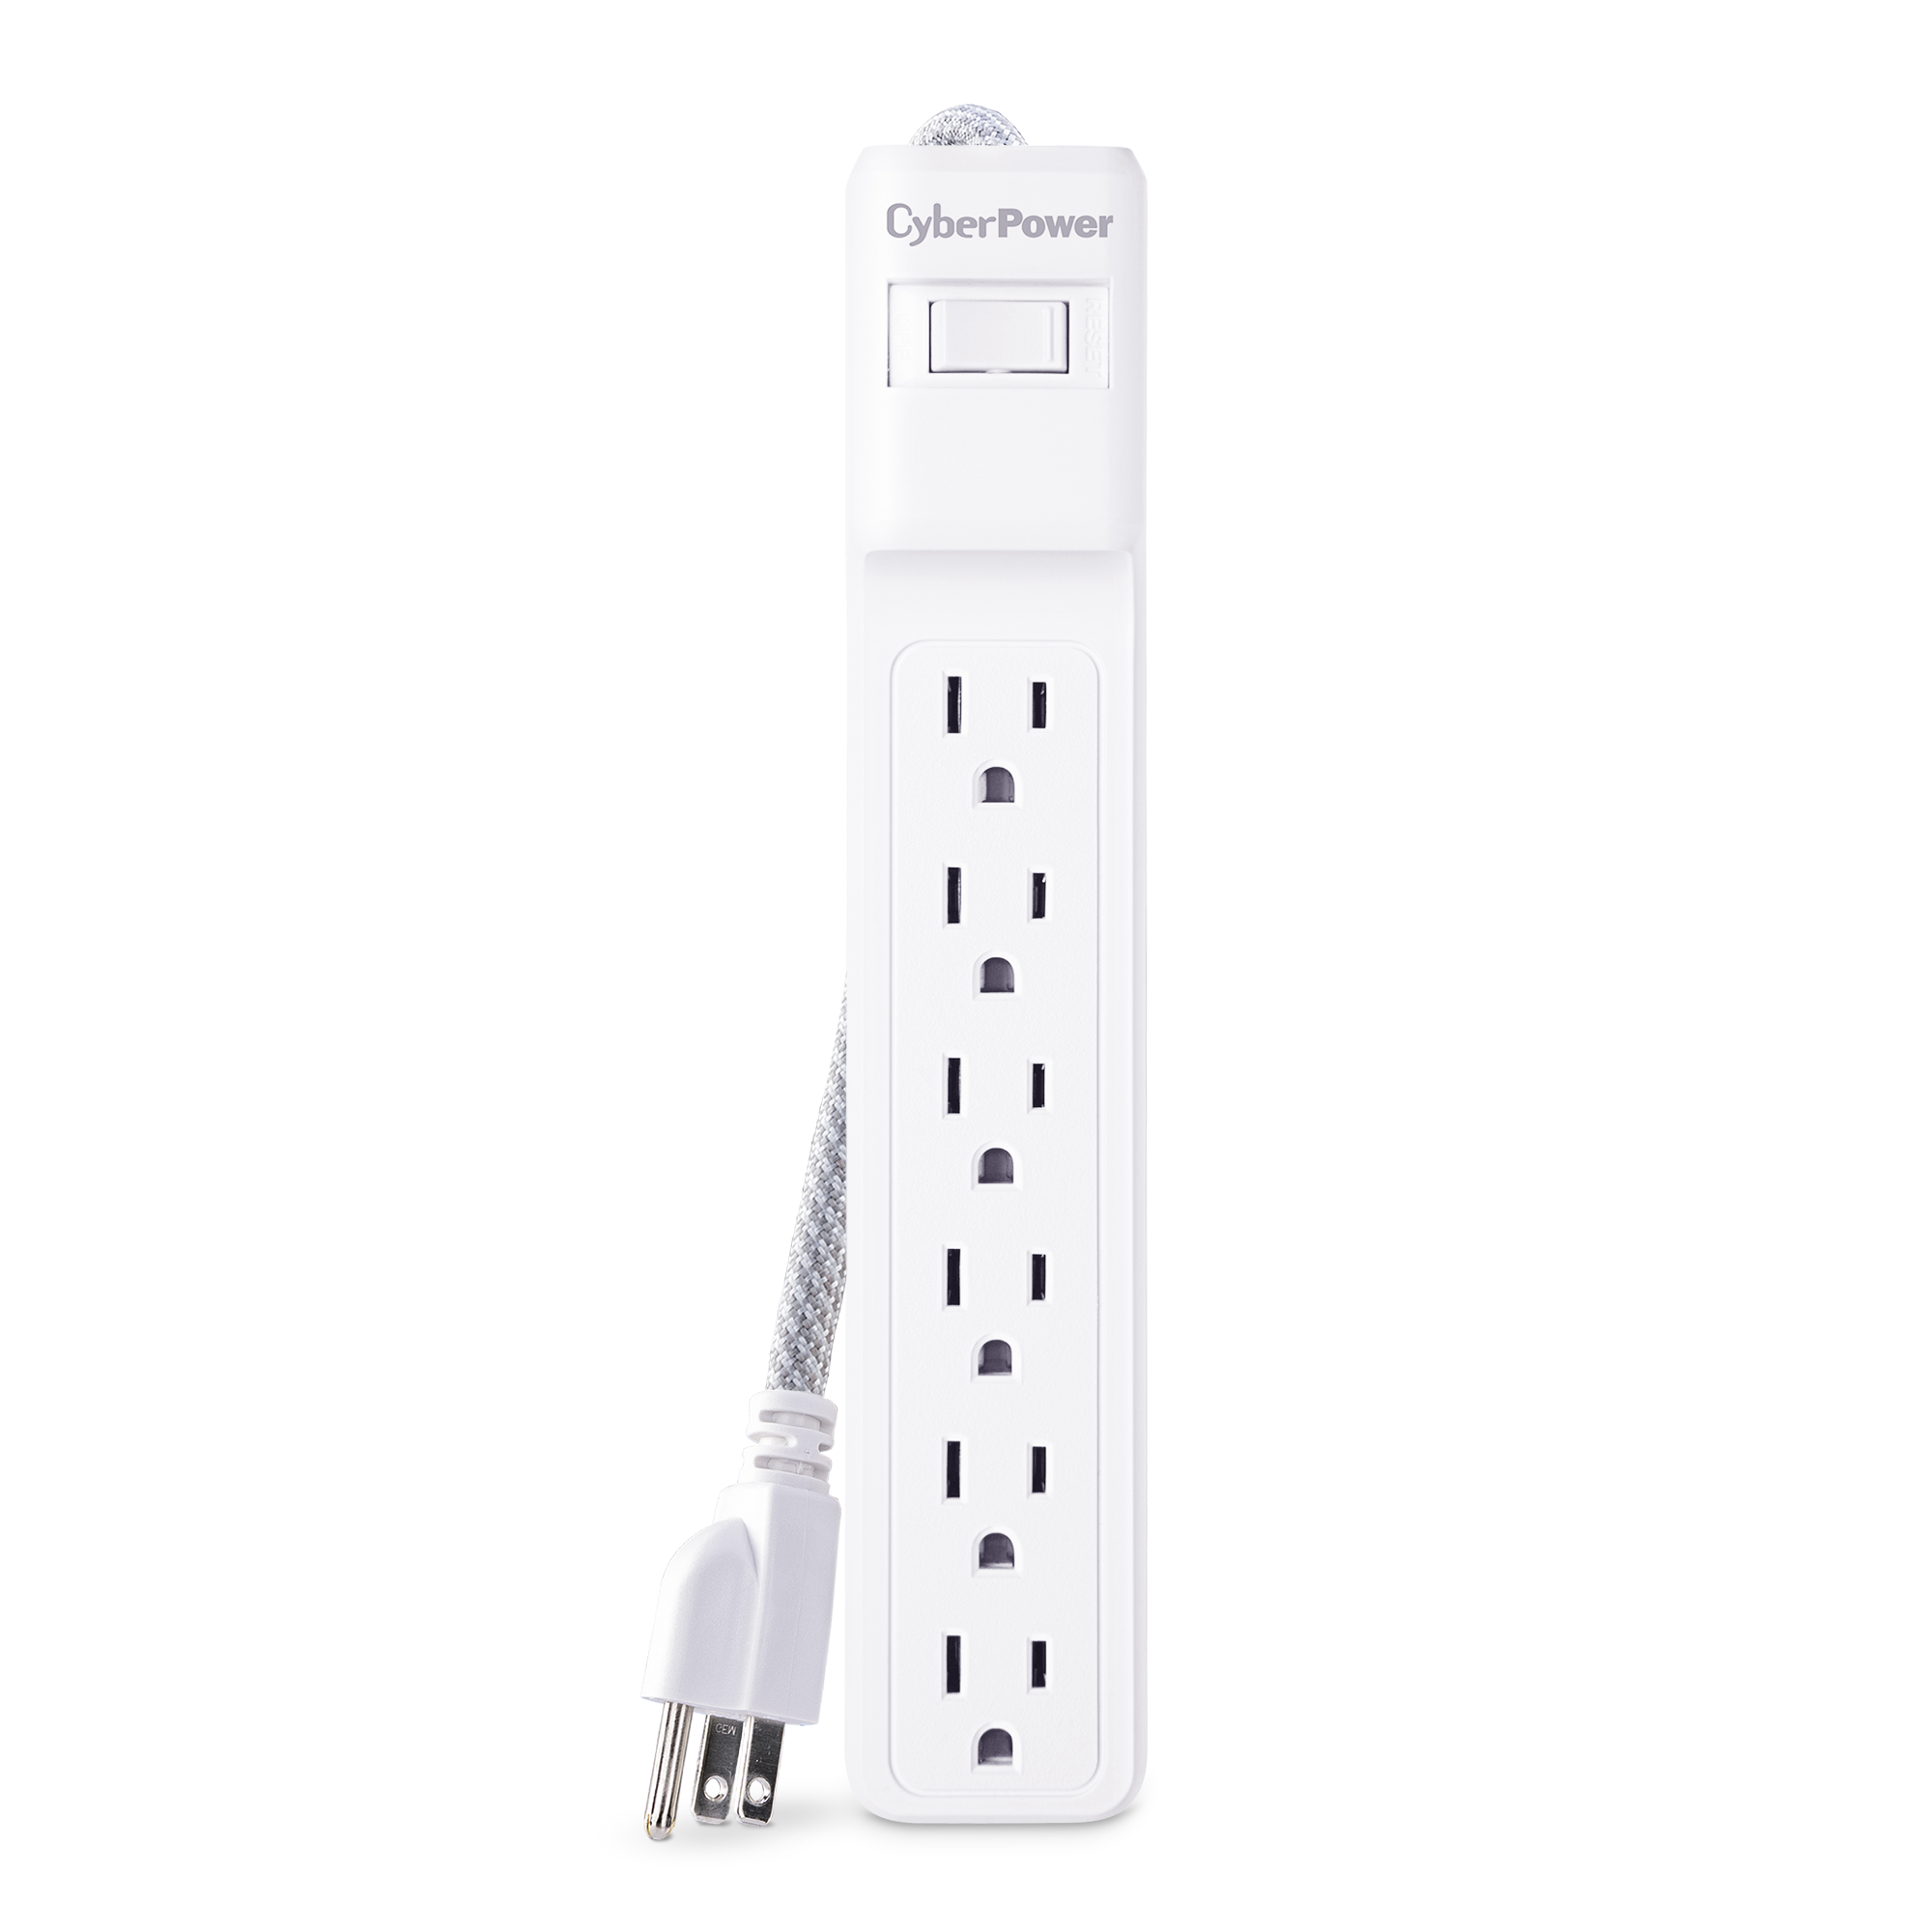 6 Outlets 1500J/125V 15 ft Power Cord White CyberPower B615 Essential Surge Protector